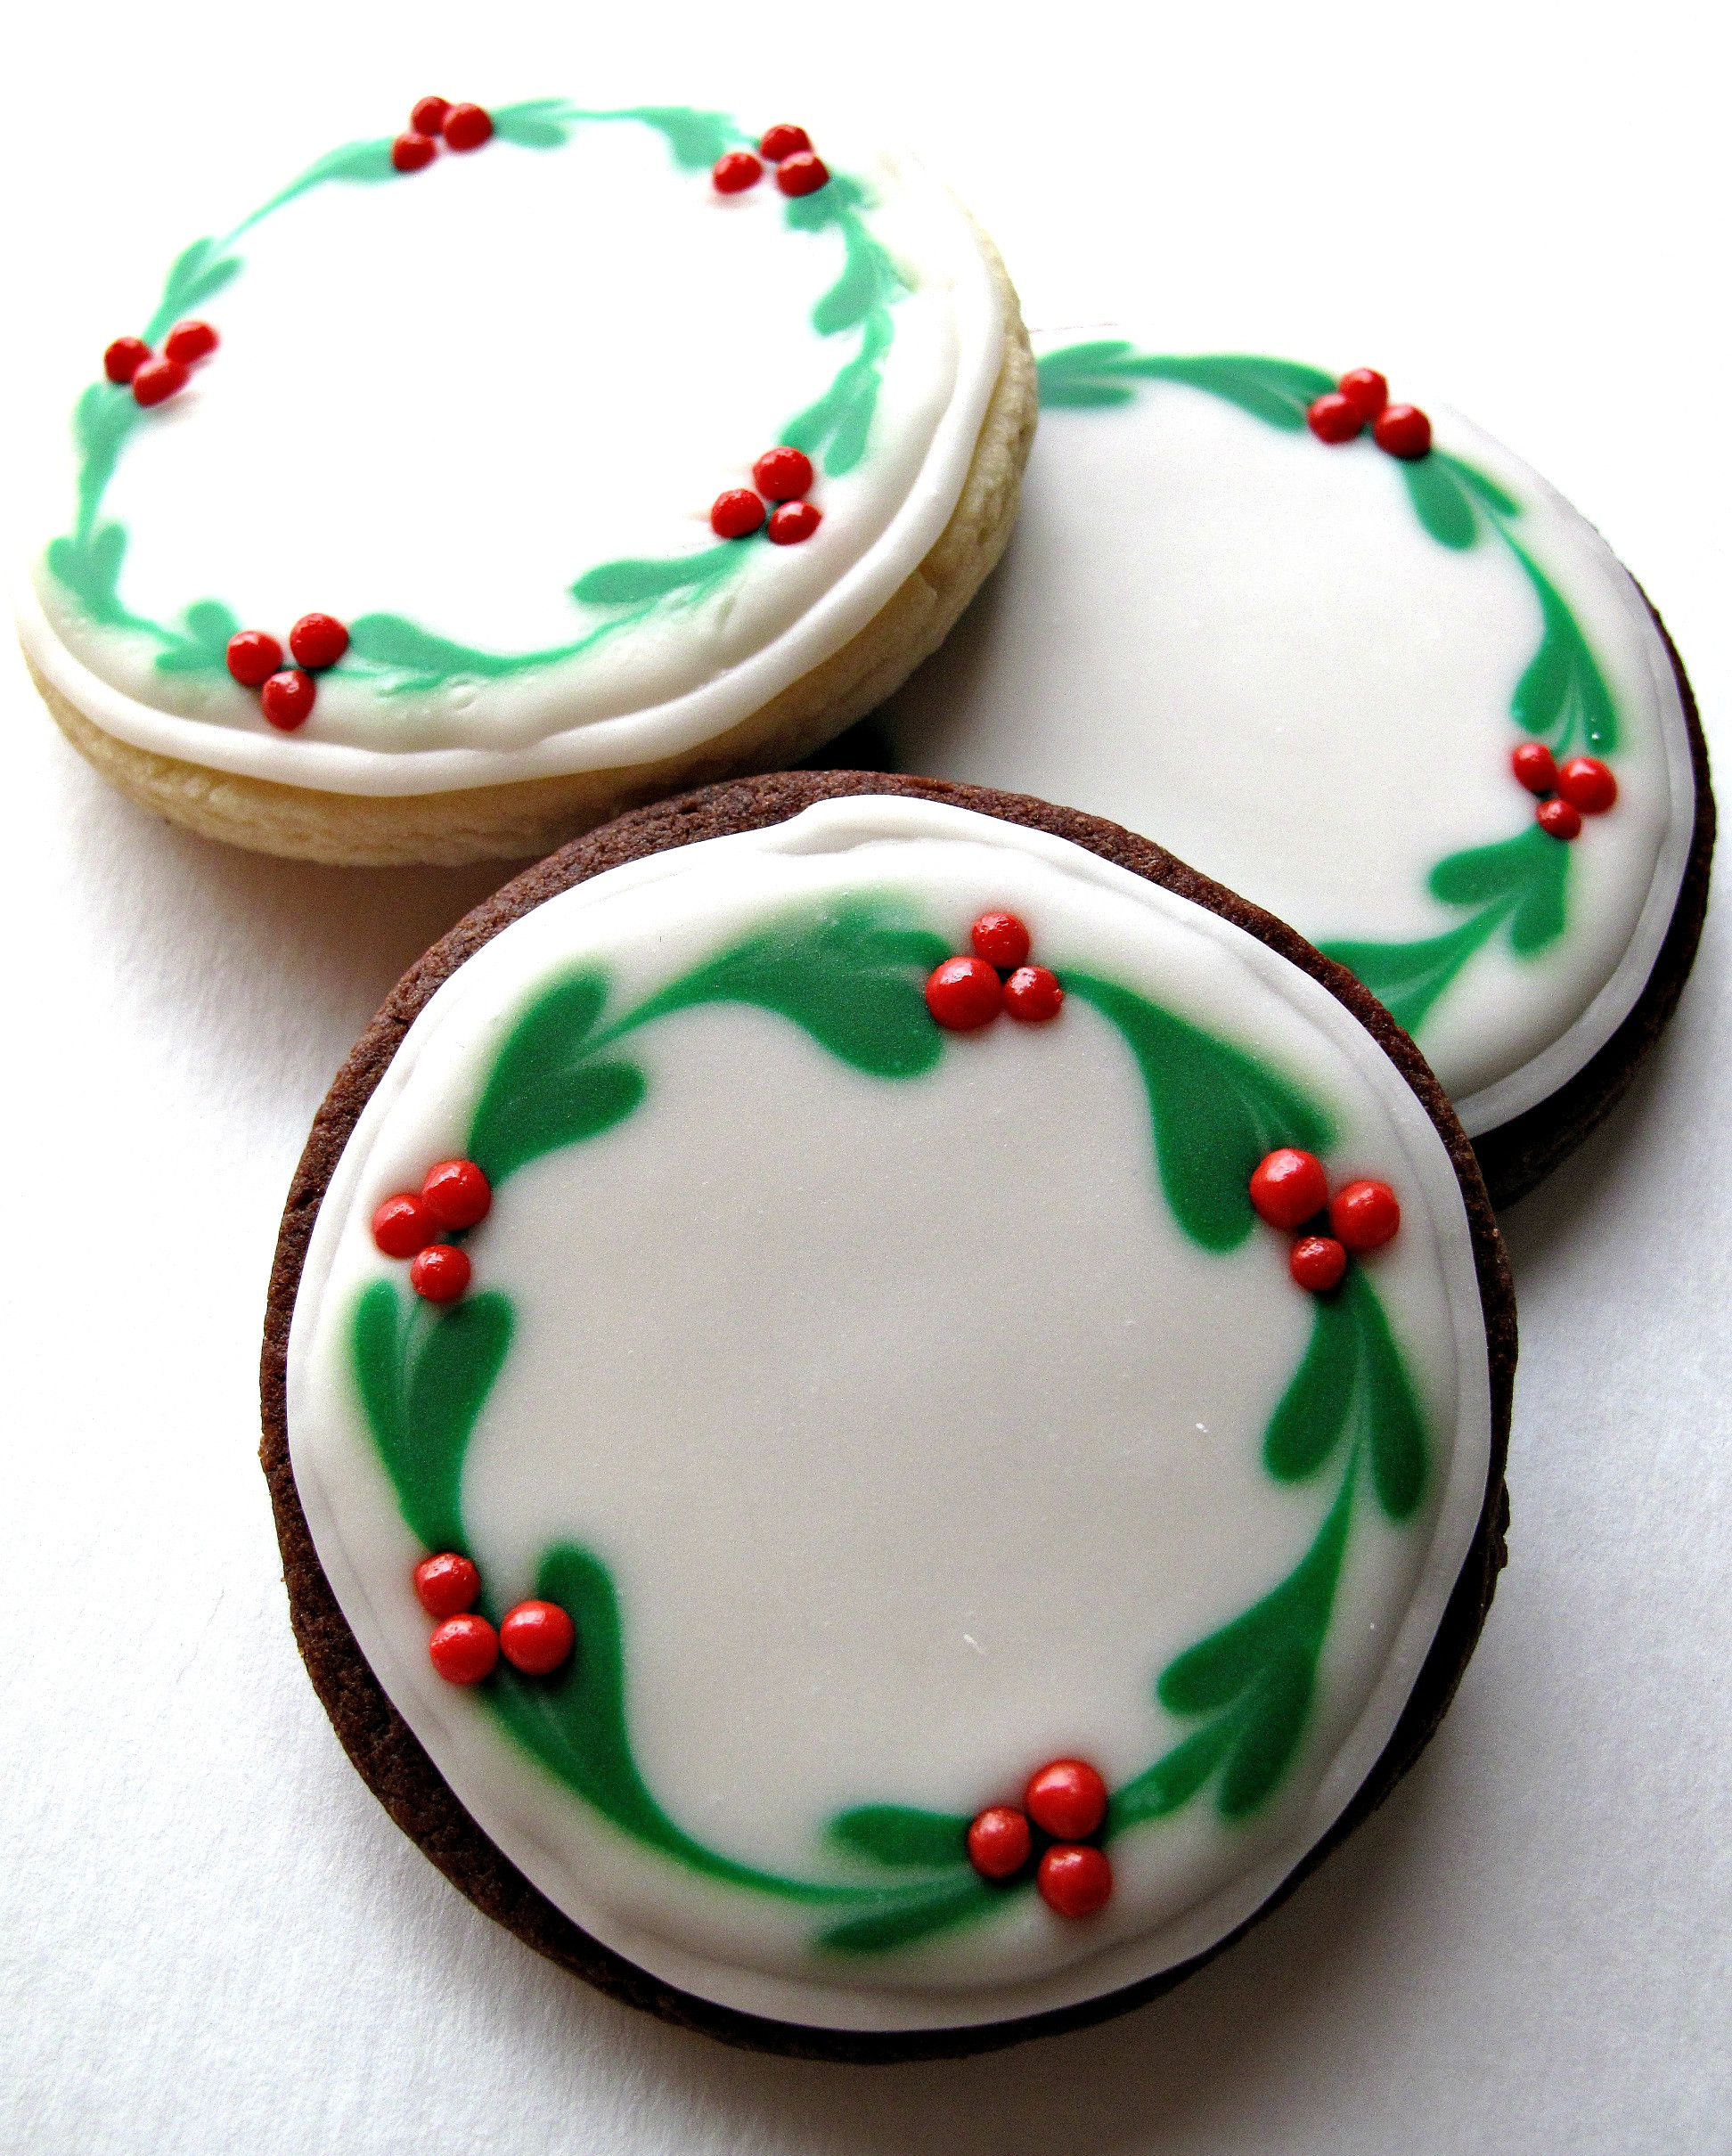 Easy Decorative Christmas Cookies
 Chocolate Covered Oreos and Iced Christmas Sugar Cookies